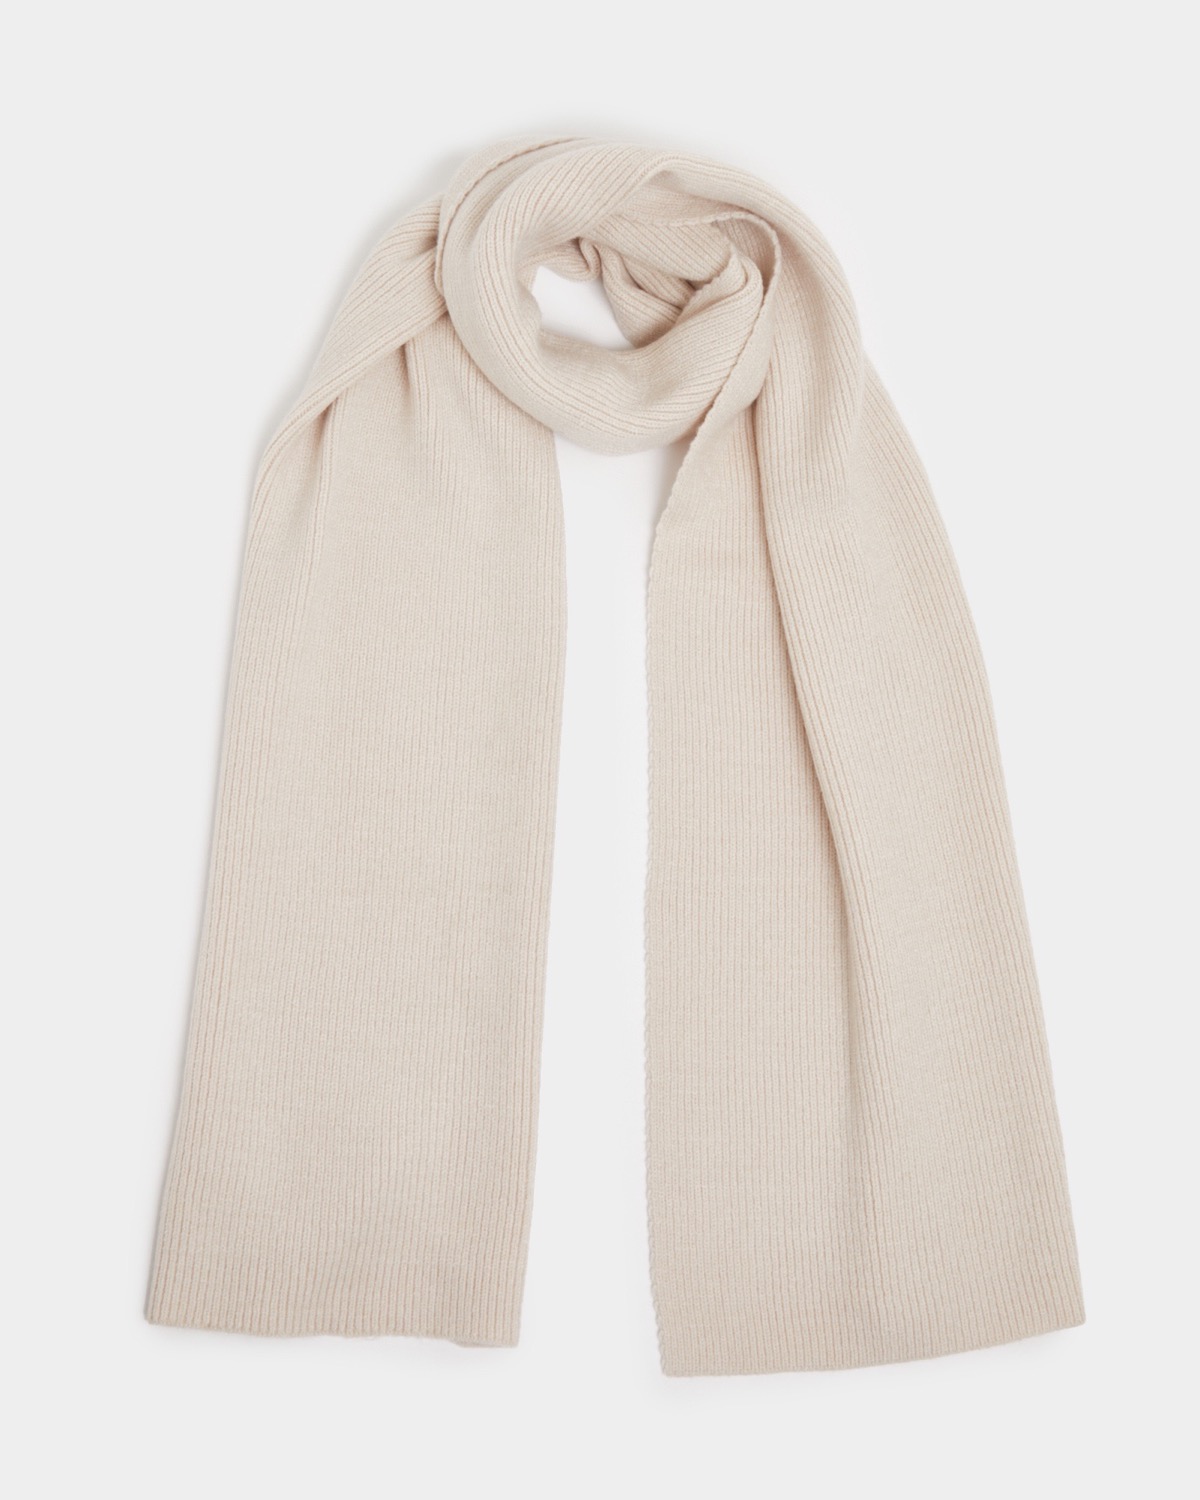 Gallery Seven | Men's Soft Knit Winter Scarf - Beige/Off White, Size: One  Size